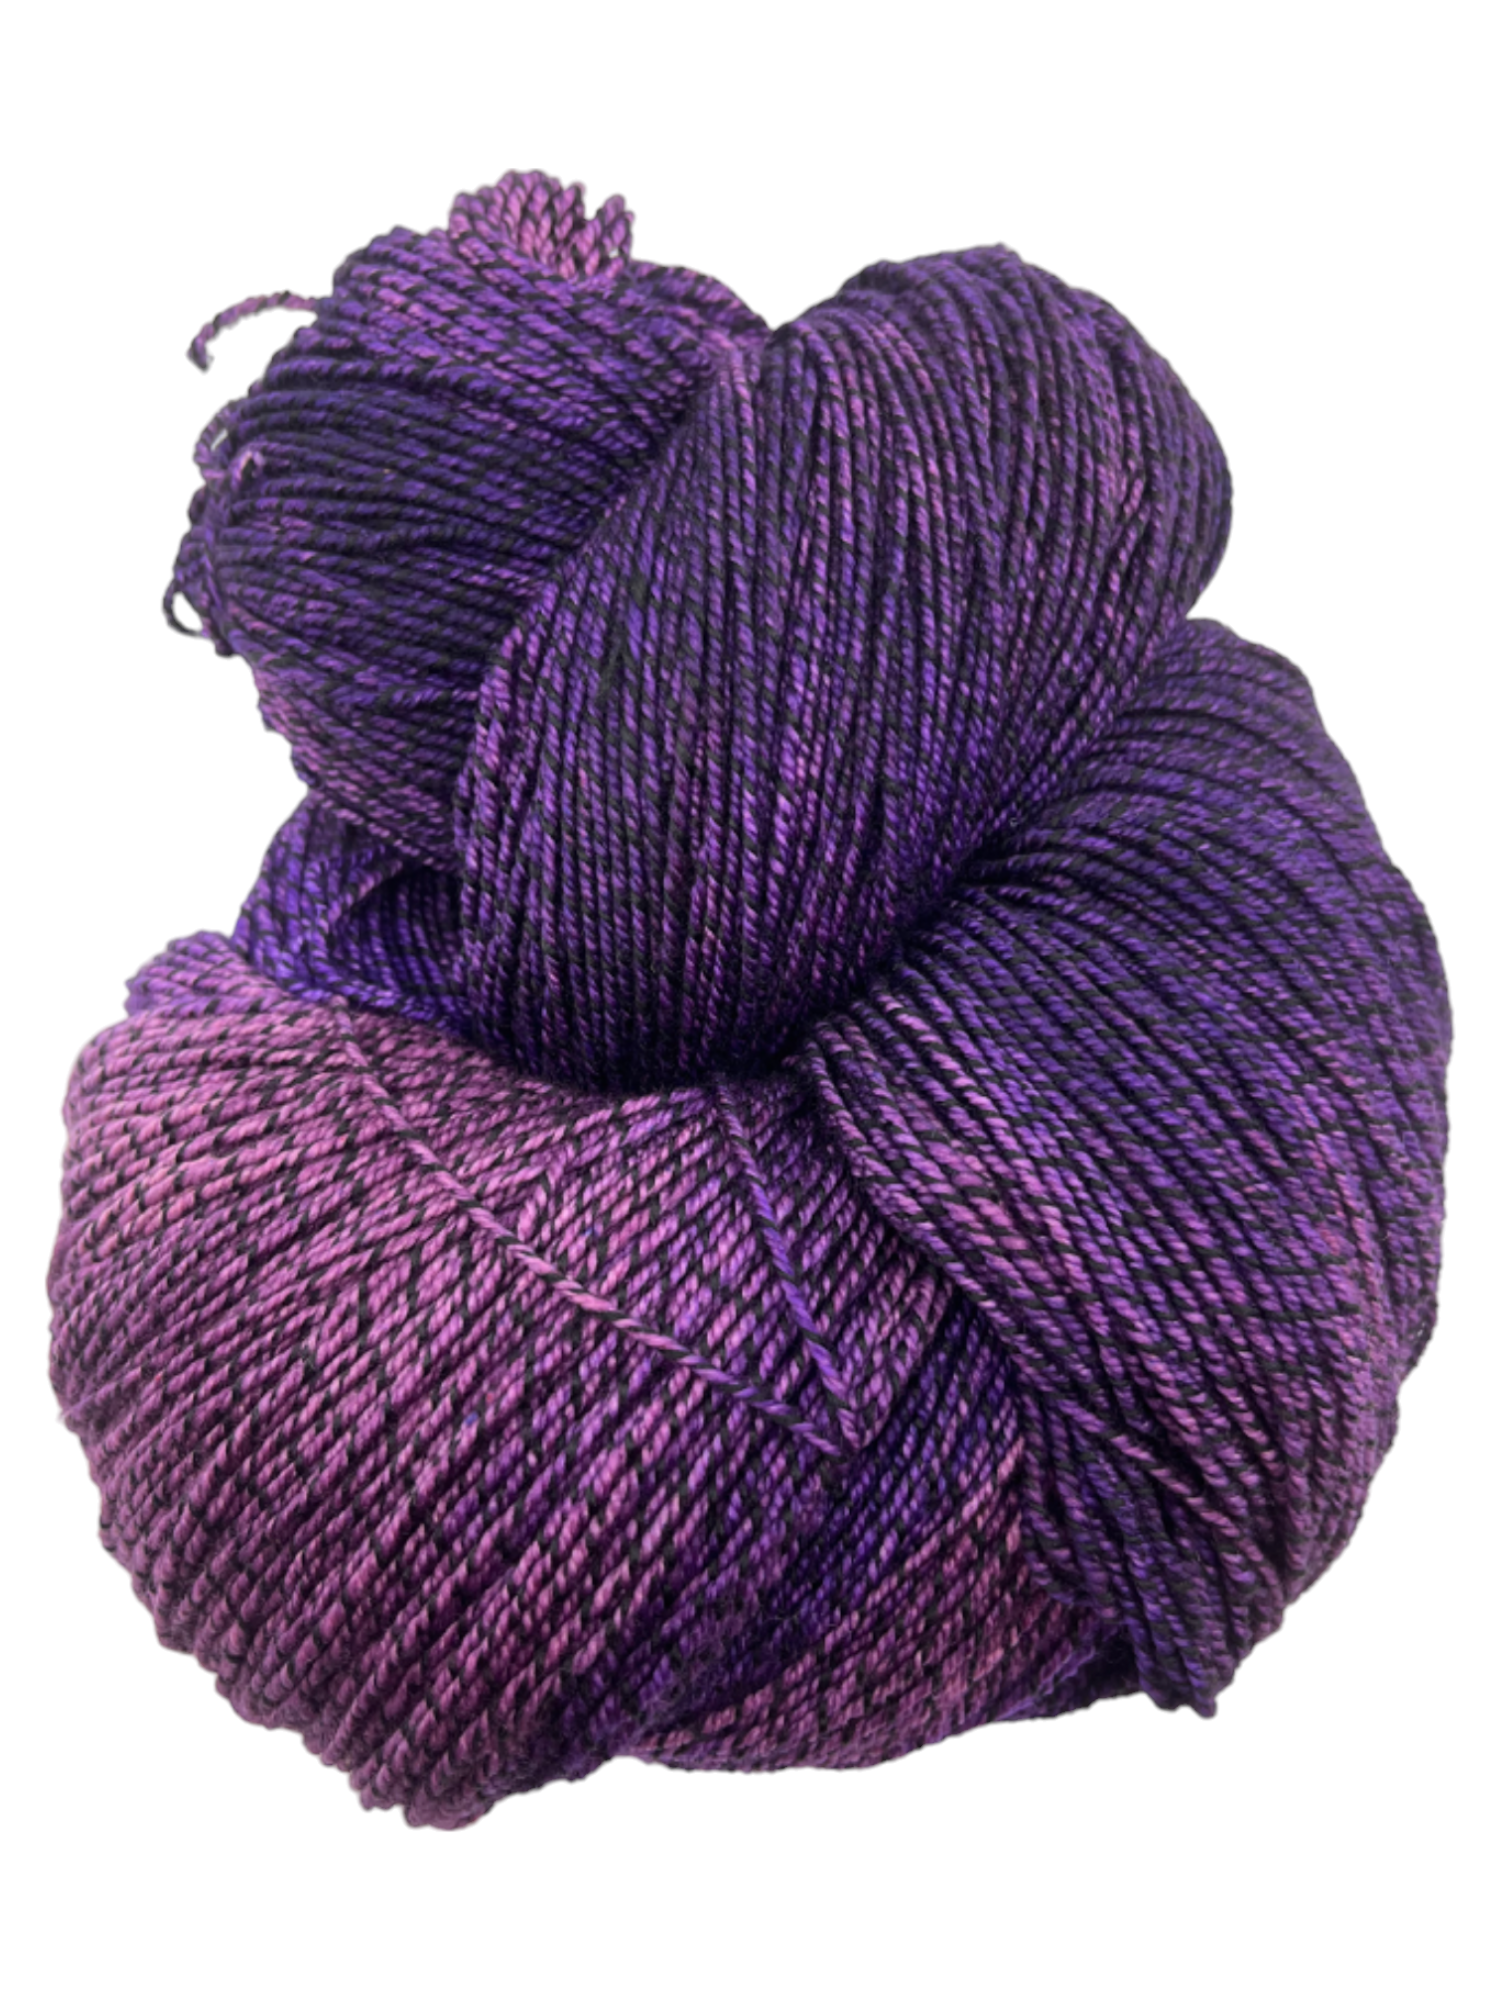 Nightshade Worsted Queen Size 41